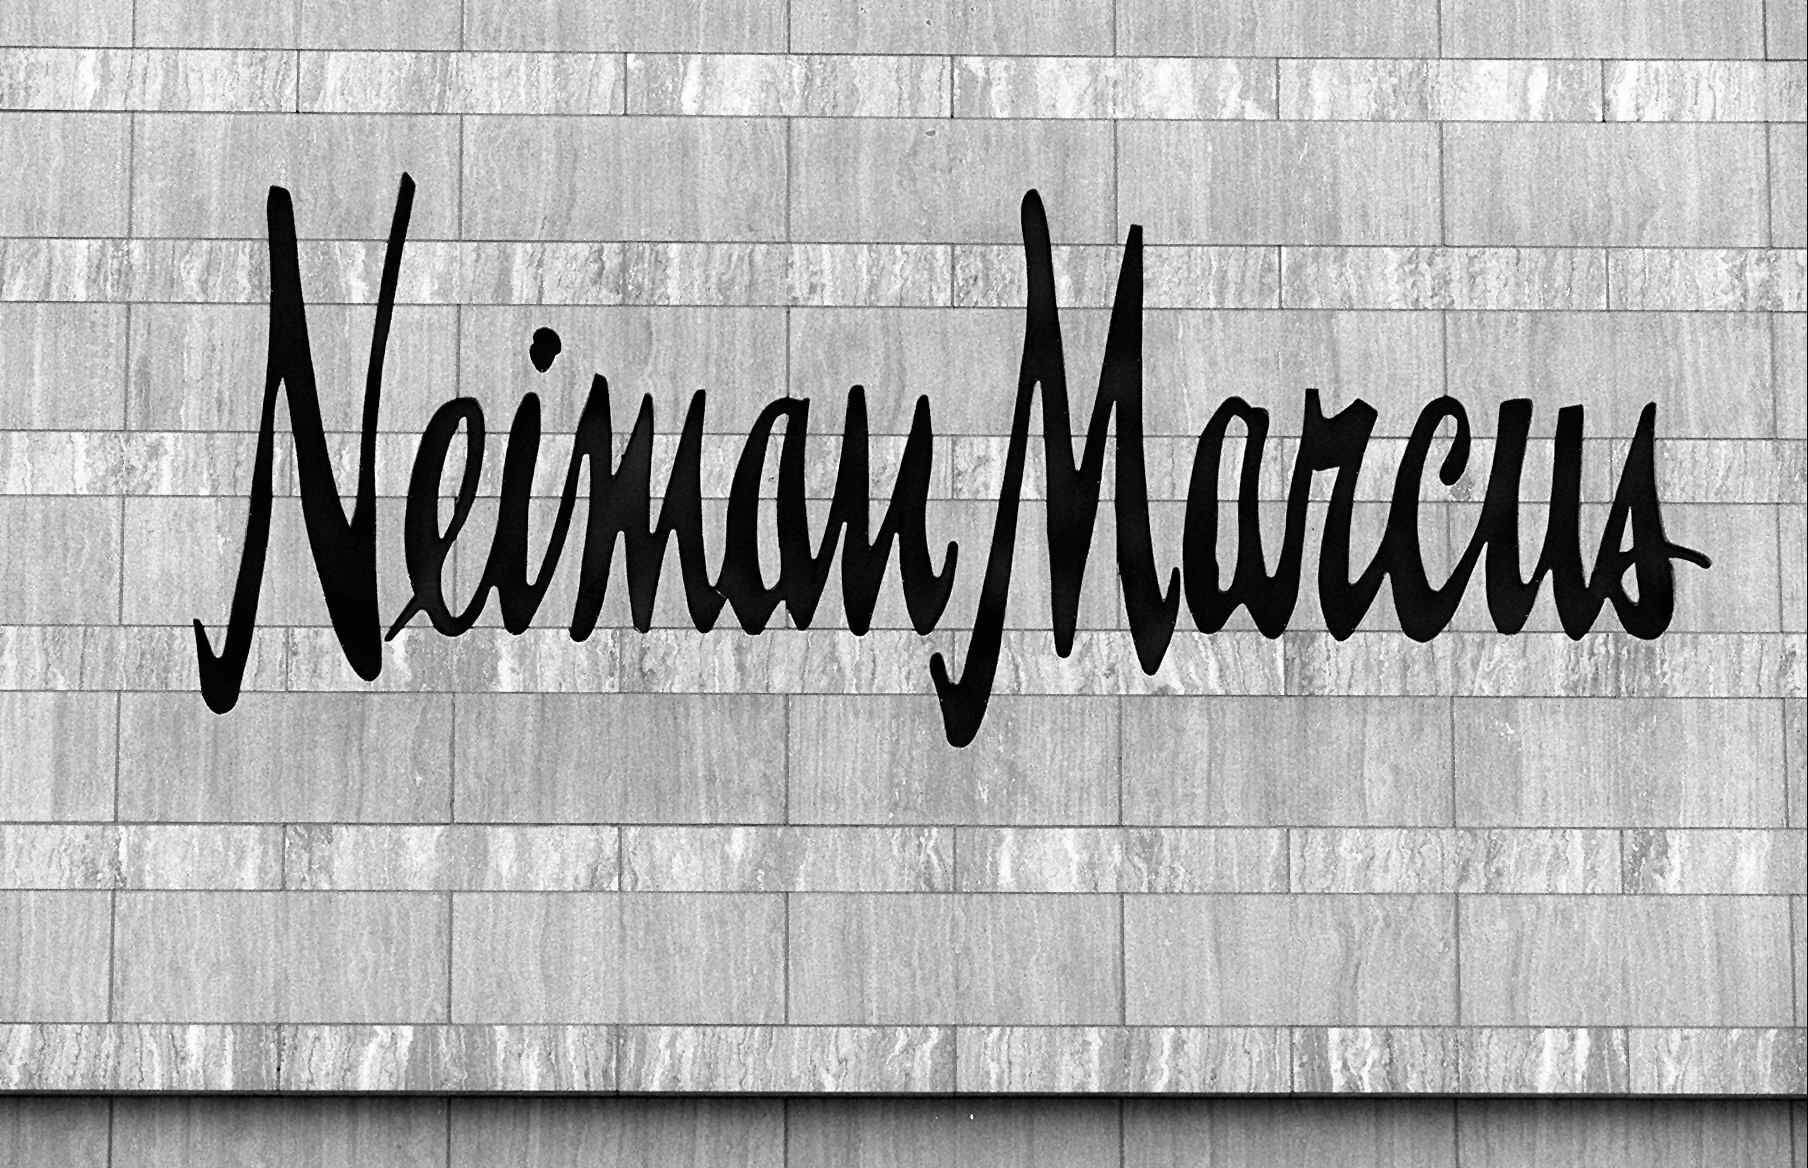 Inside Neiman Marcus' Post-Bankruptcy Playbook